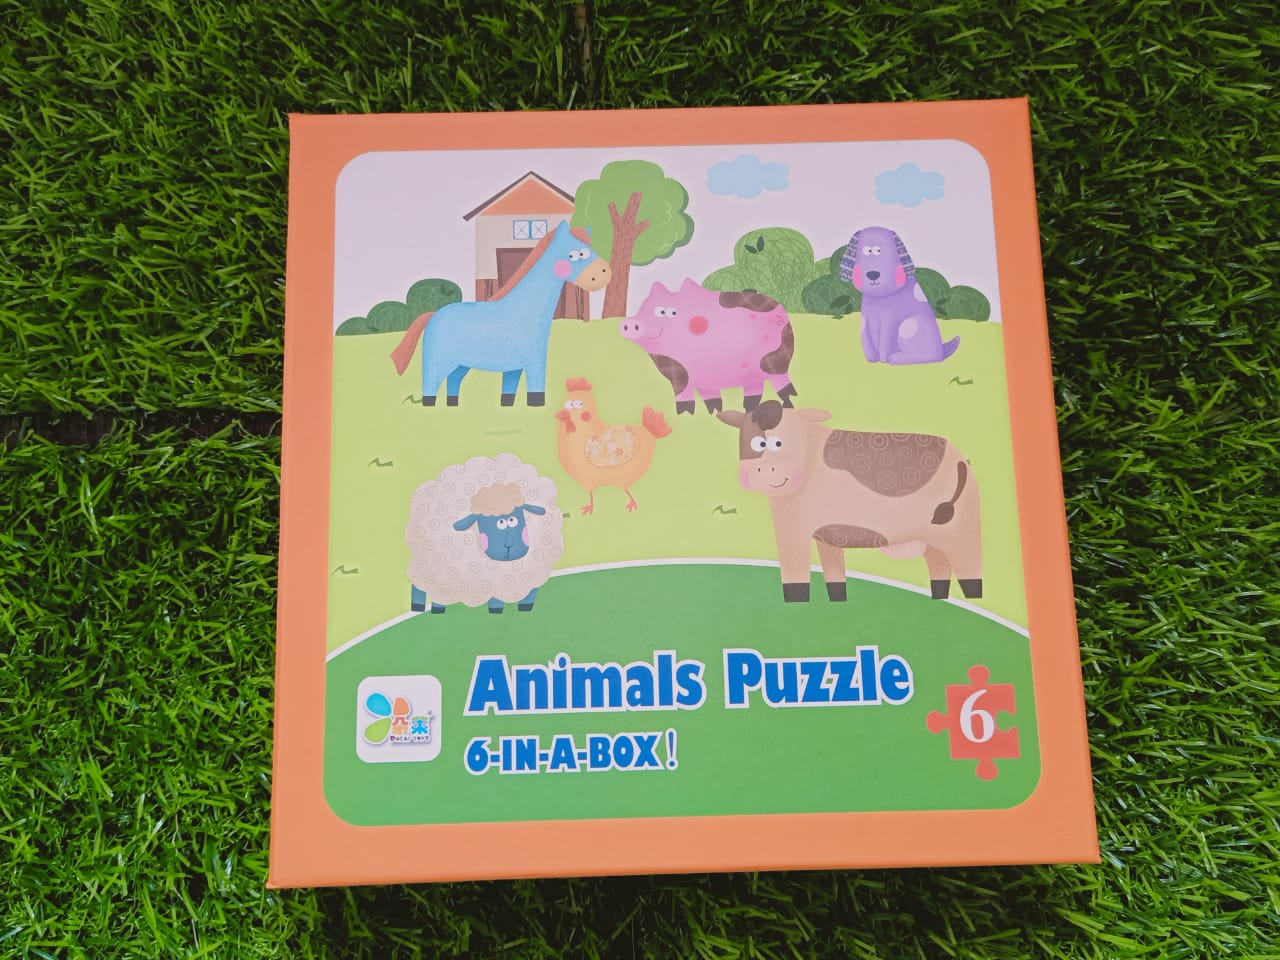 Wooden Puzzle Games 6-In-A-Box for Kids-SHTM1076